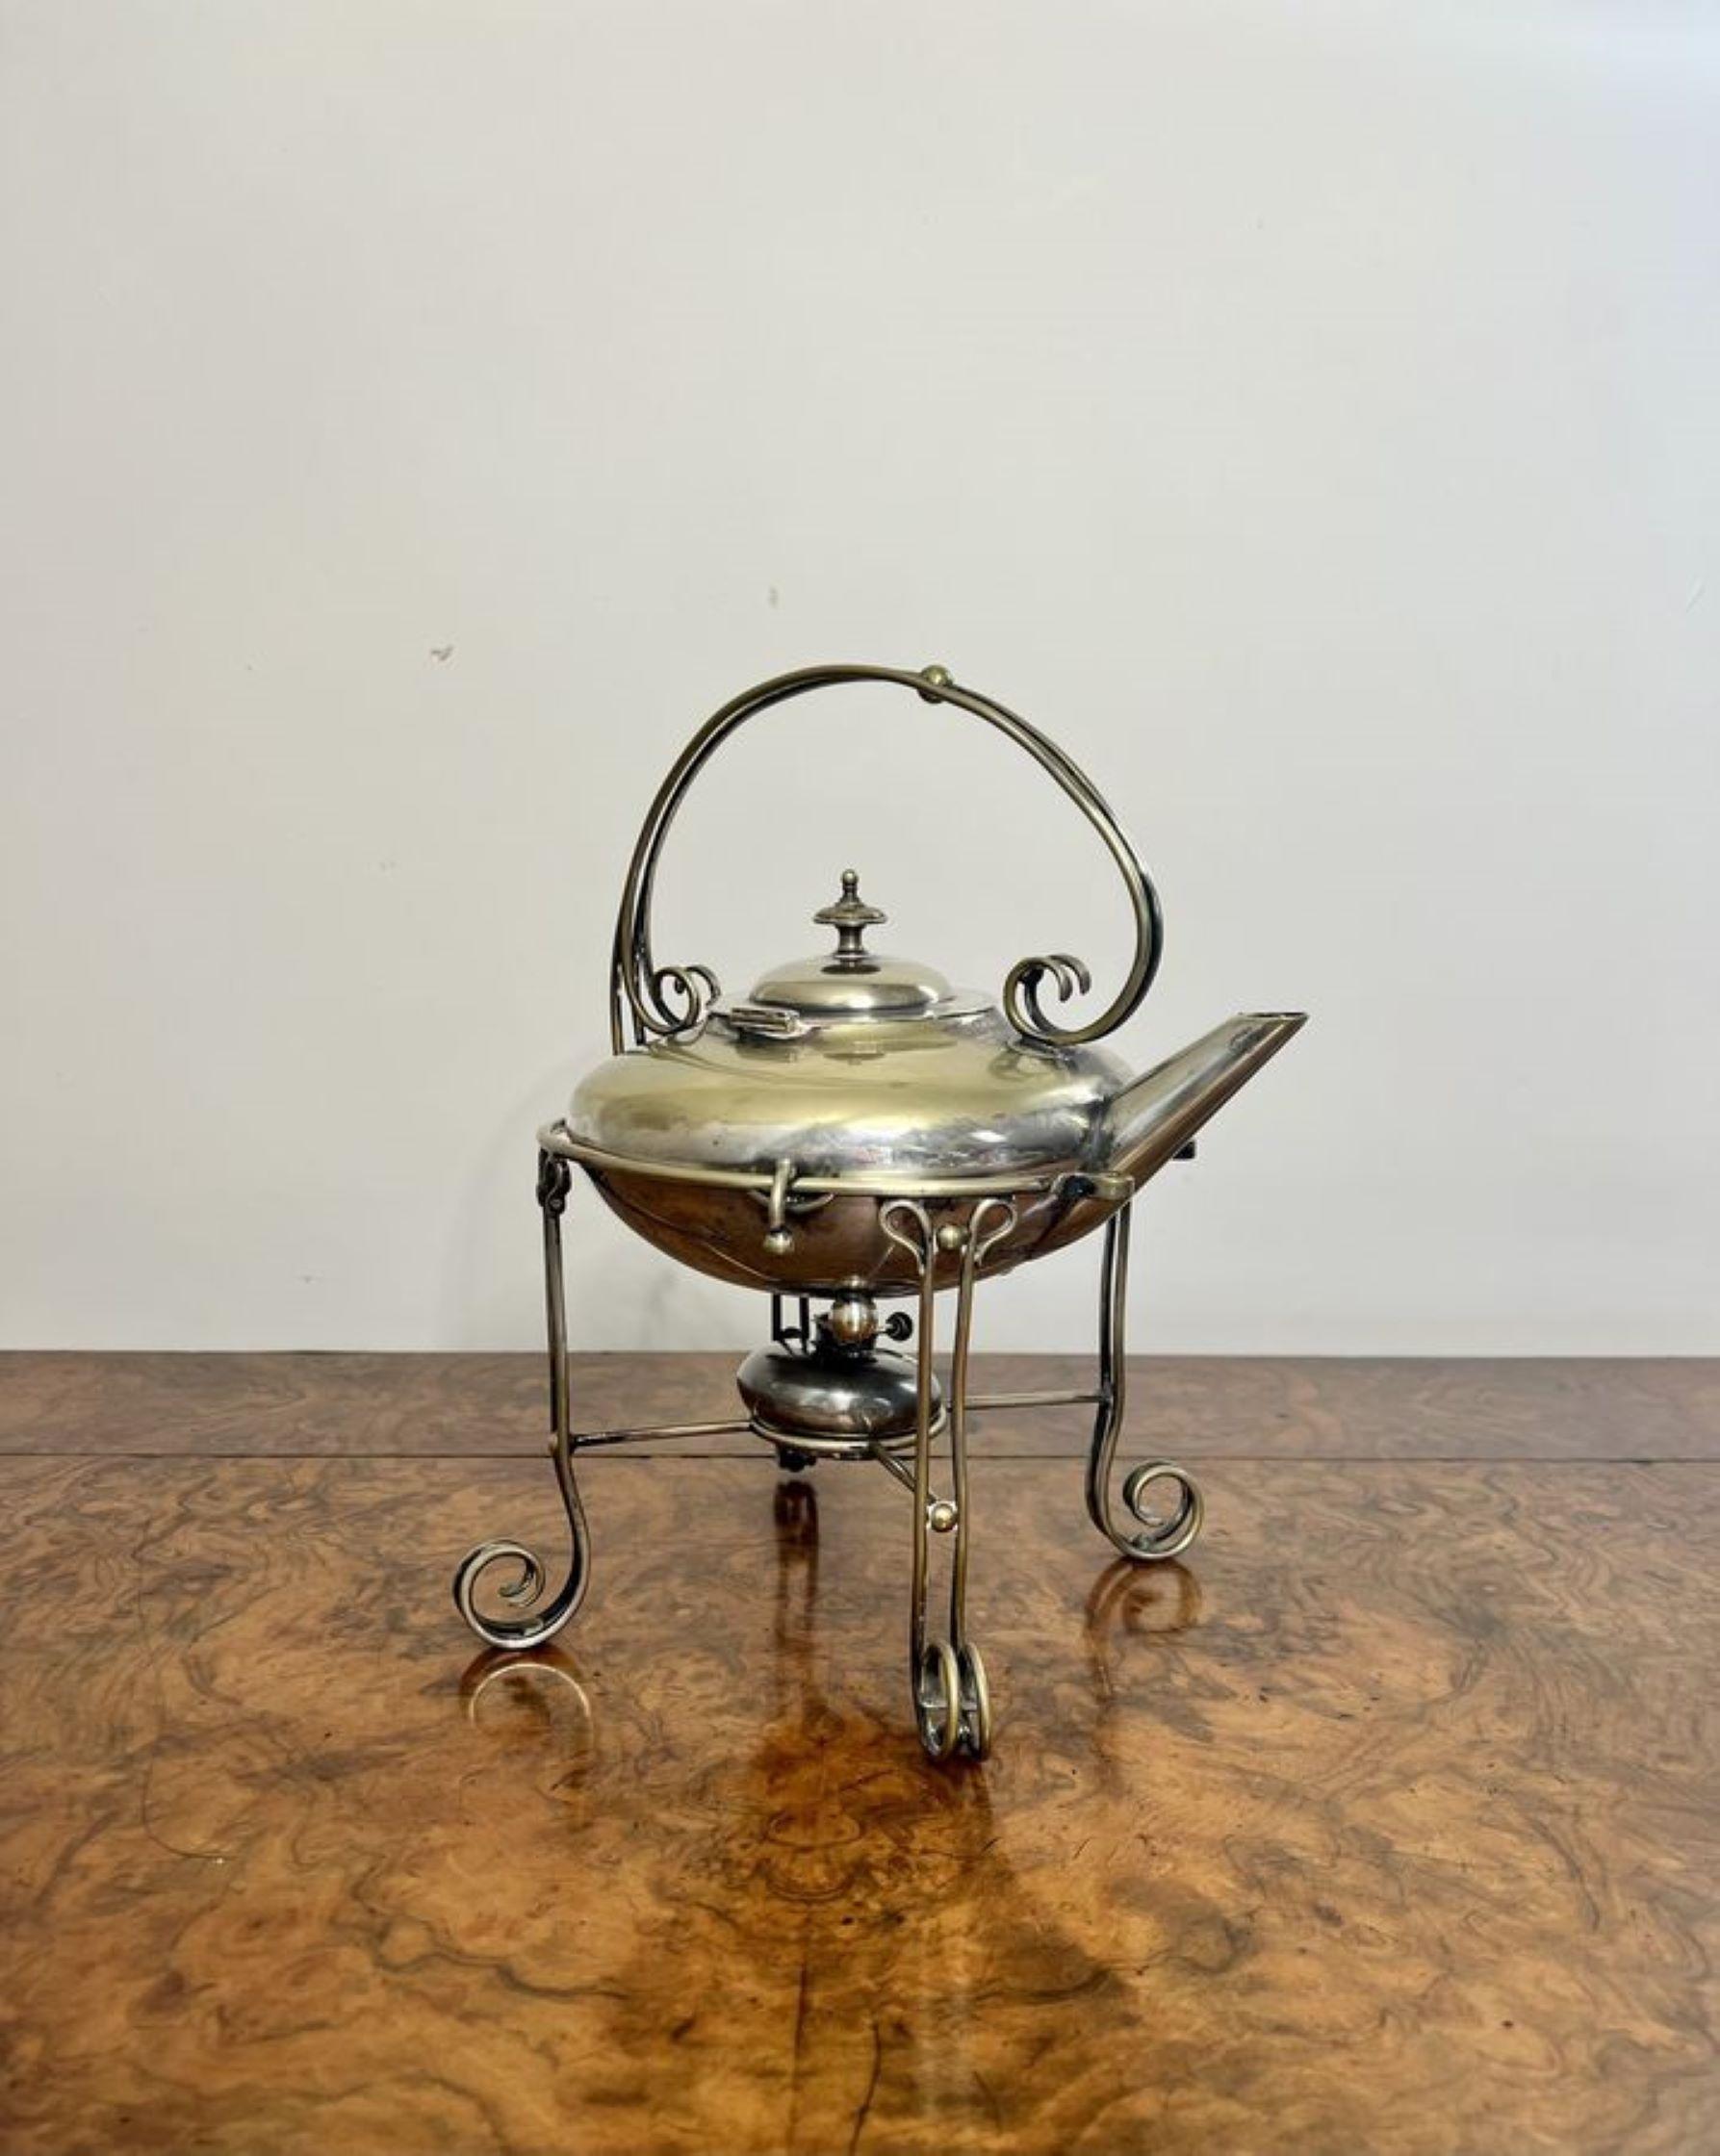 Quality antique Edwardian silver plated spirit kettle having a quality silver plated kettle raised on an ornate silver plated stand, with the original burner, standing on four shaped feet.

D. 1900